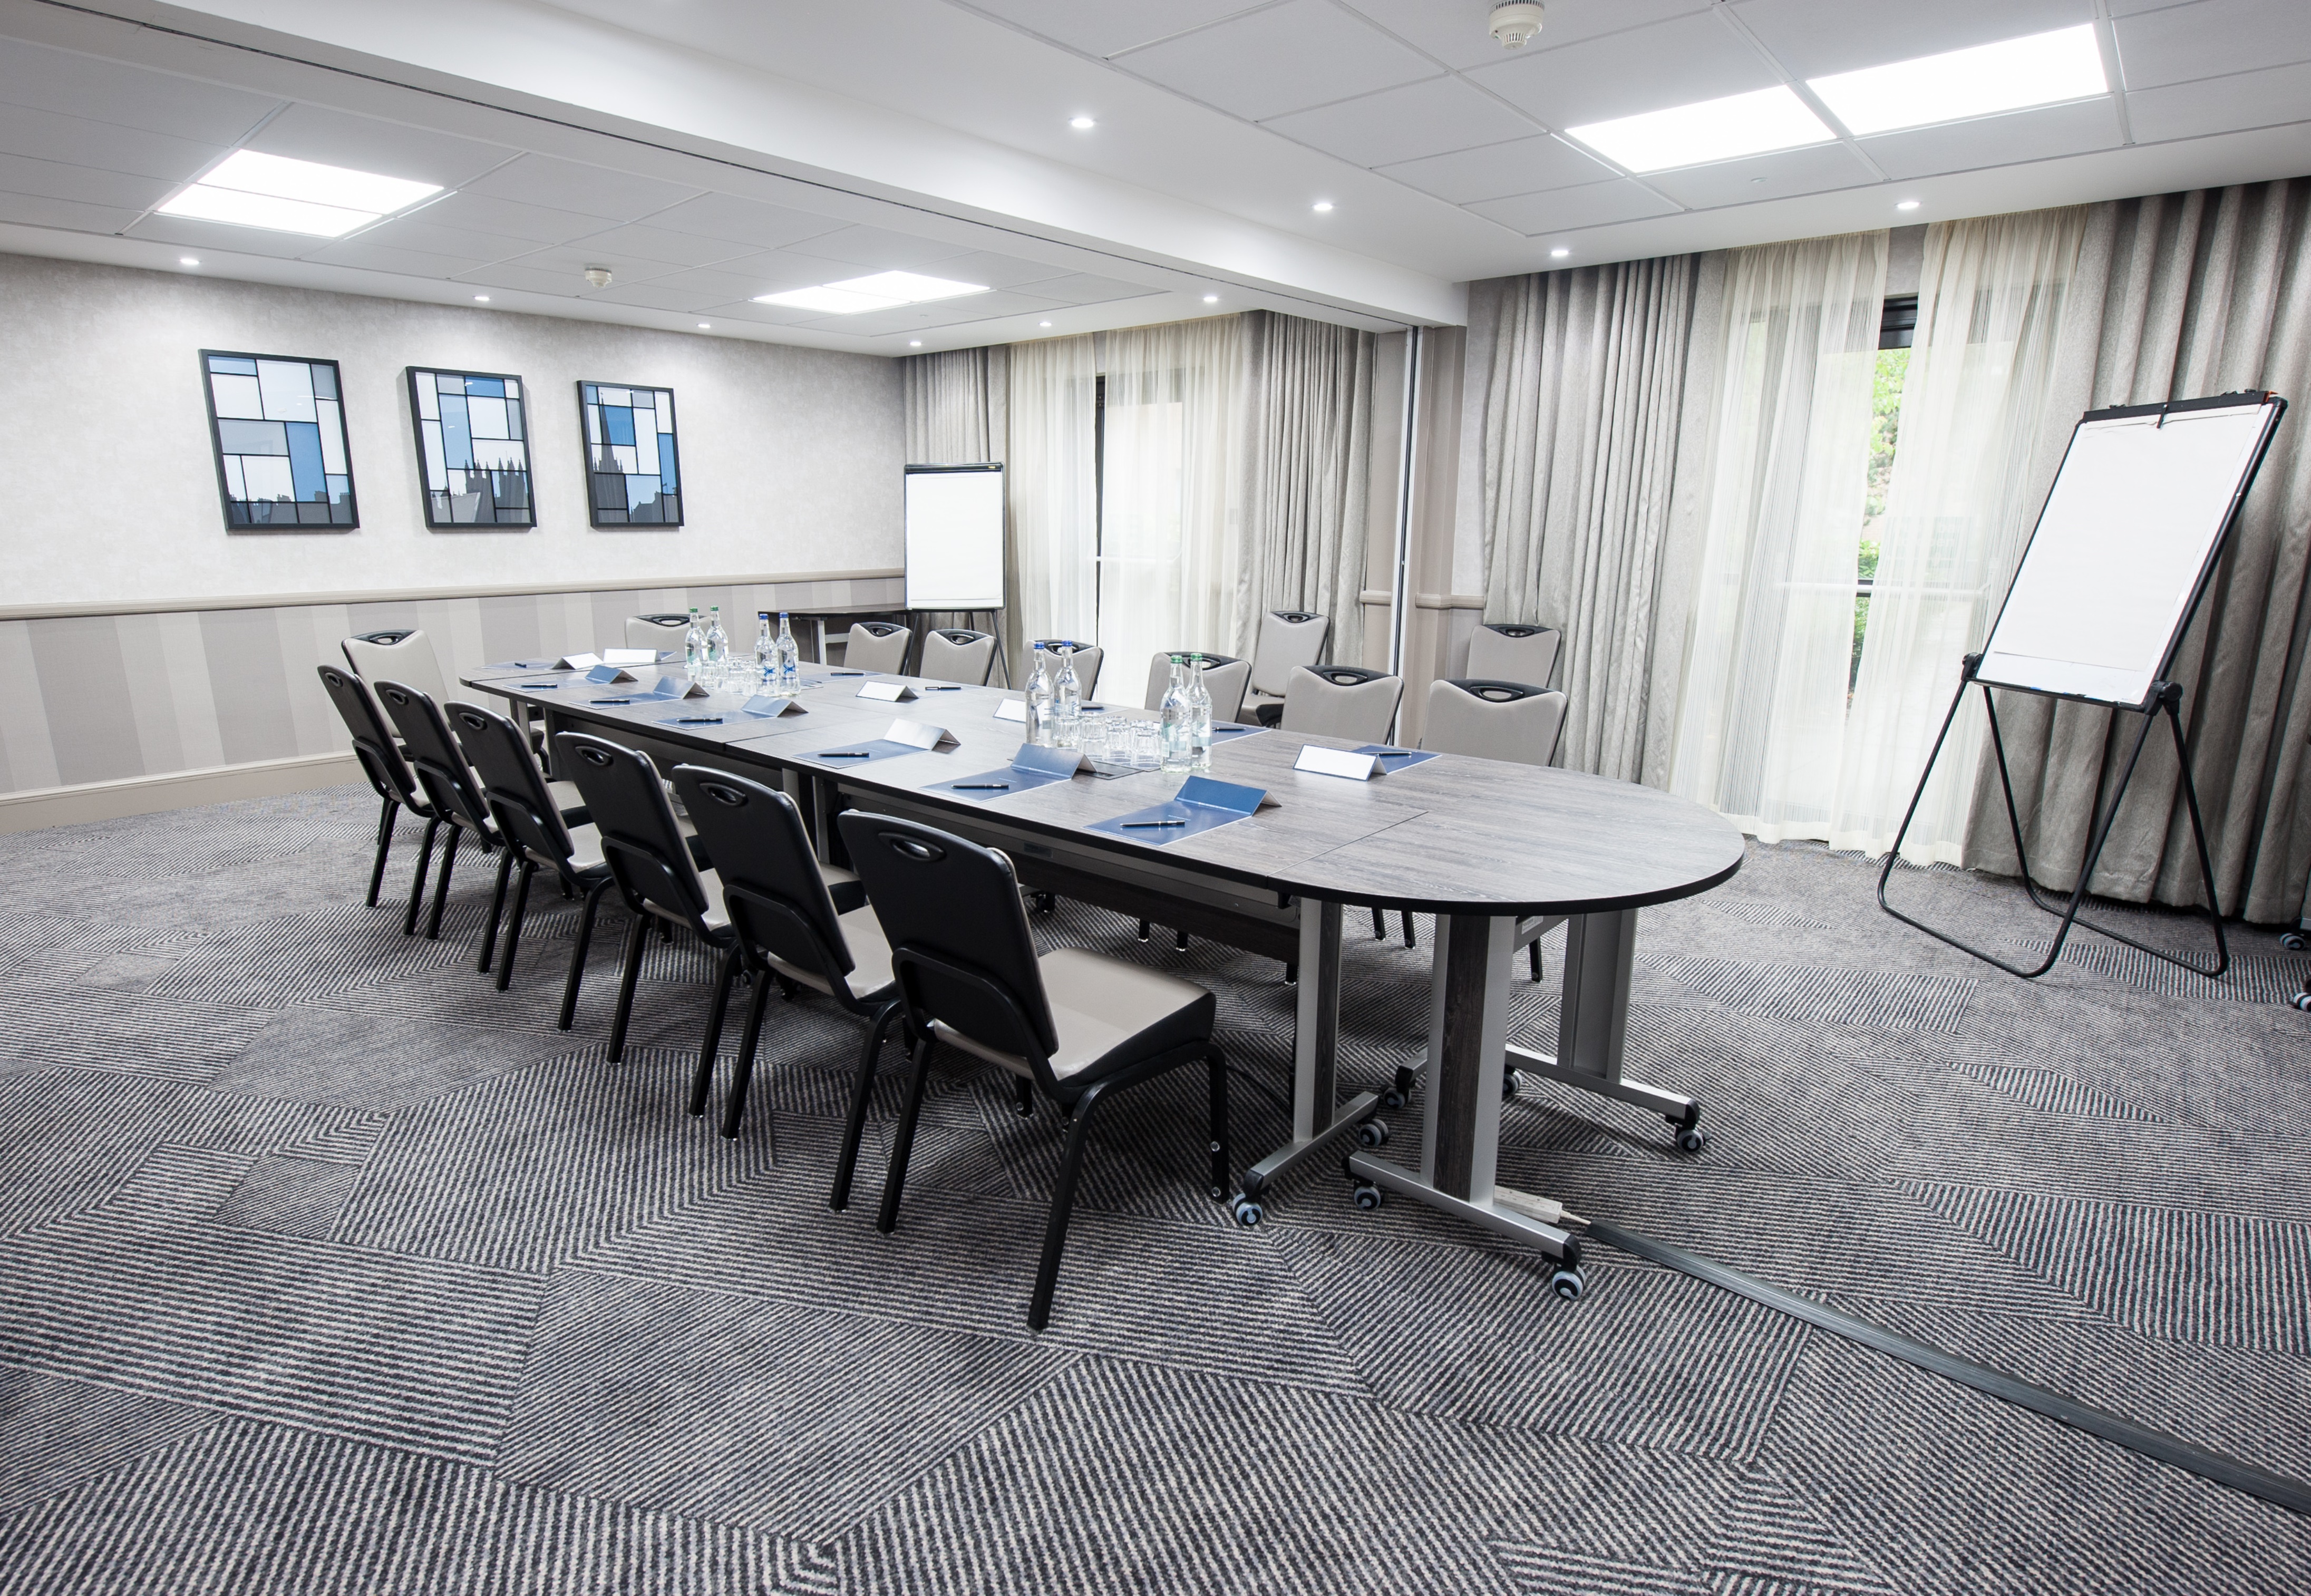 Boardroom With Seating for 14 Around Table, Wall Art, Two Presentation Easels, Two Speaker's Chairs and Window With Long Drapes